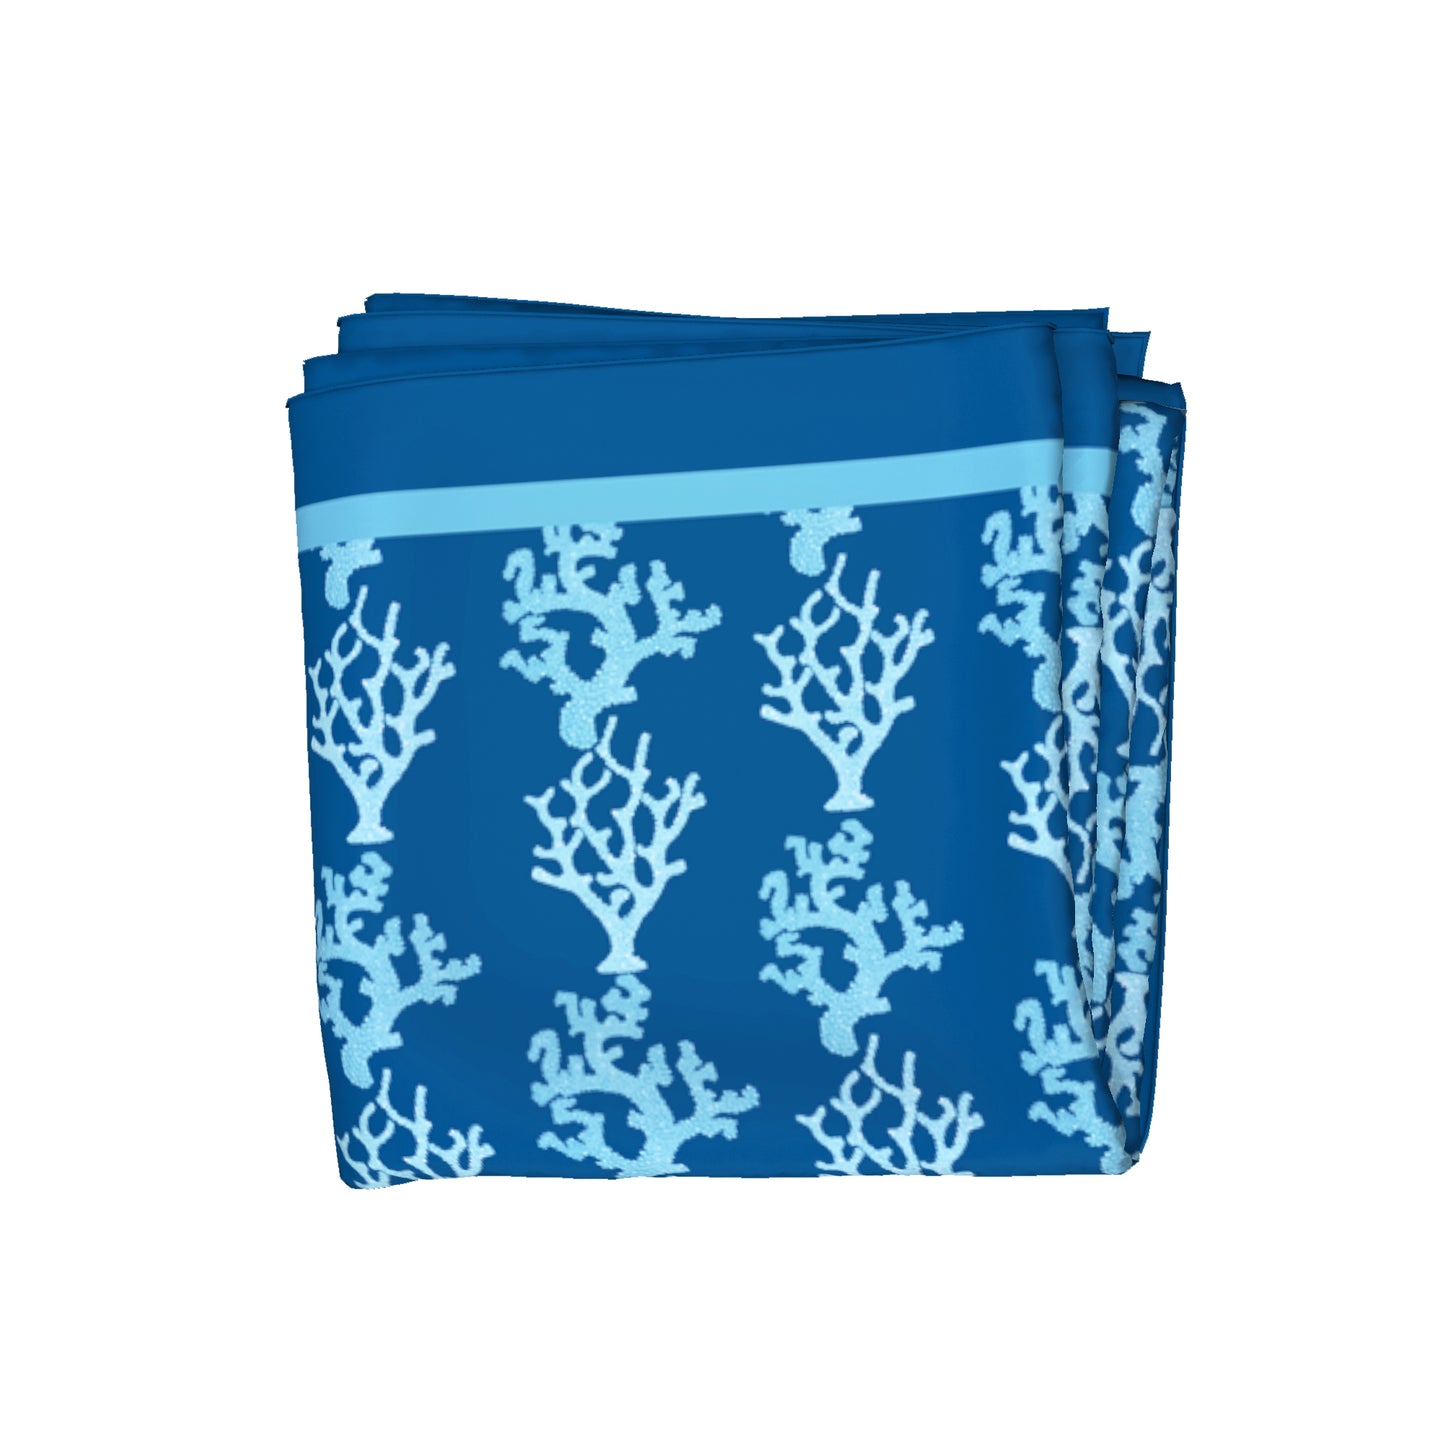 Sea Coral Branches Satin Square Scarf, Navy Blue & Aqua, Two Sizes